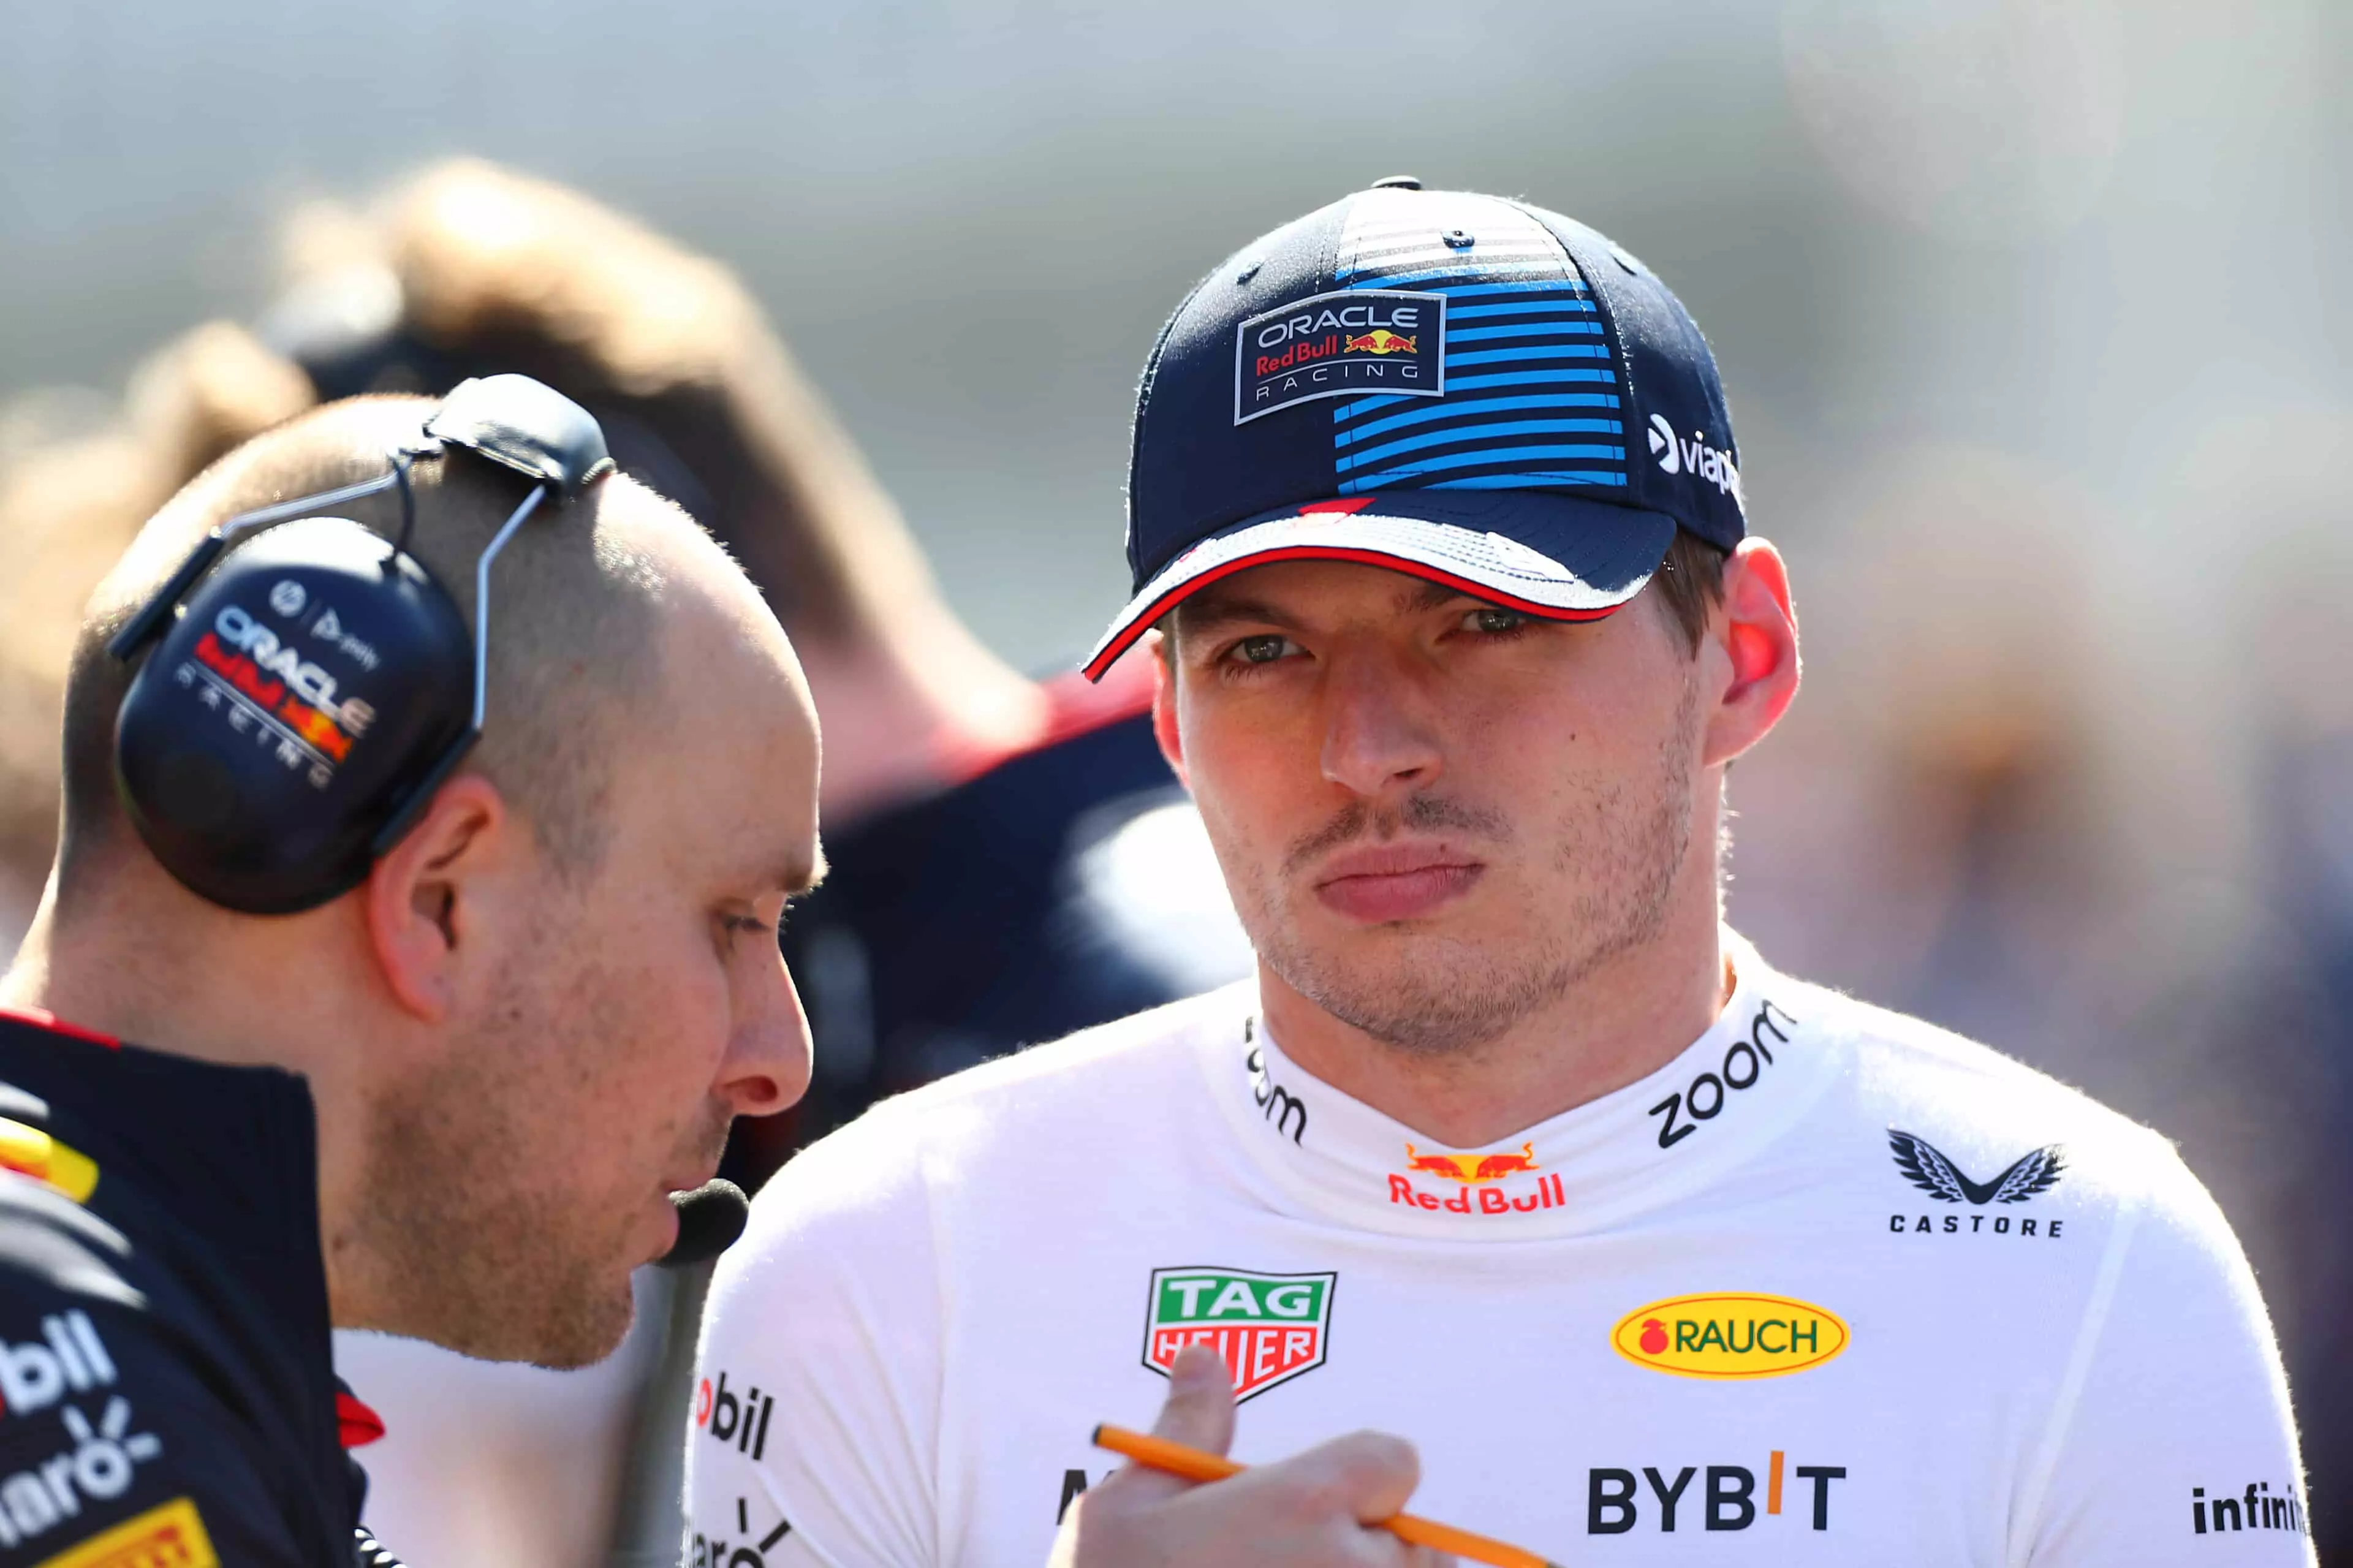 Max Verstappen discusses with Lambiase before the start of the Australian GP